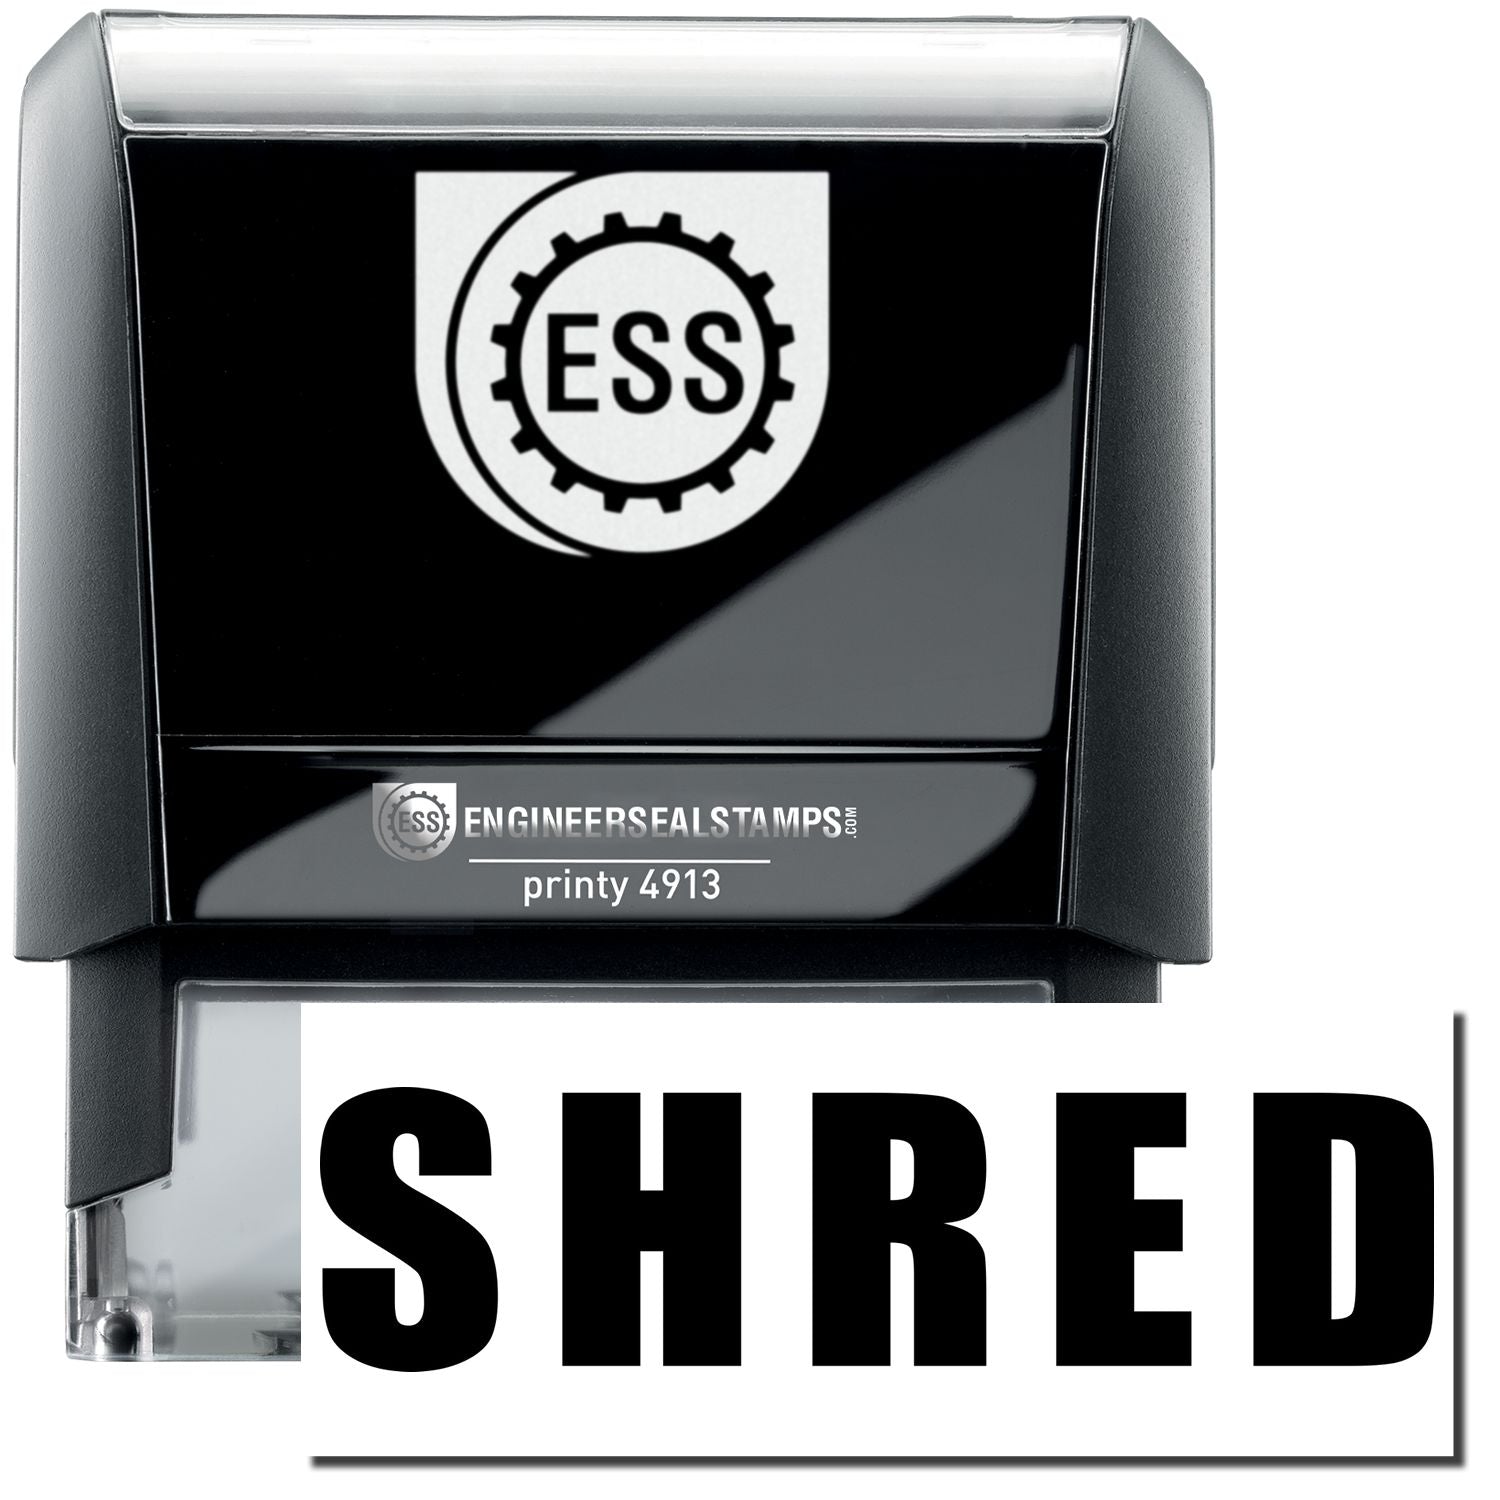 A self-inking stamp with a stamped image showing how the text "SHRED" in a large bold font is displayed by it after stamping.